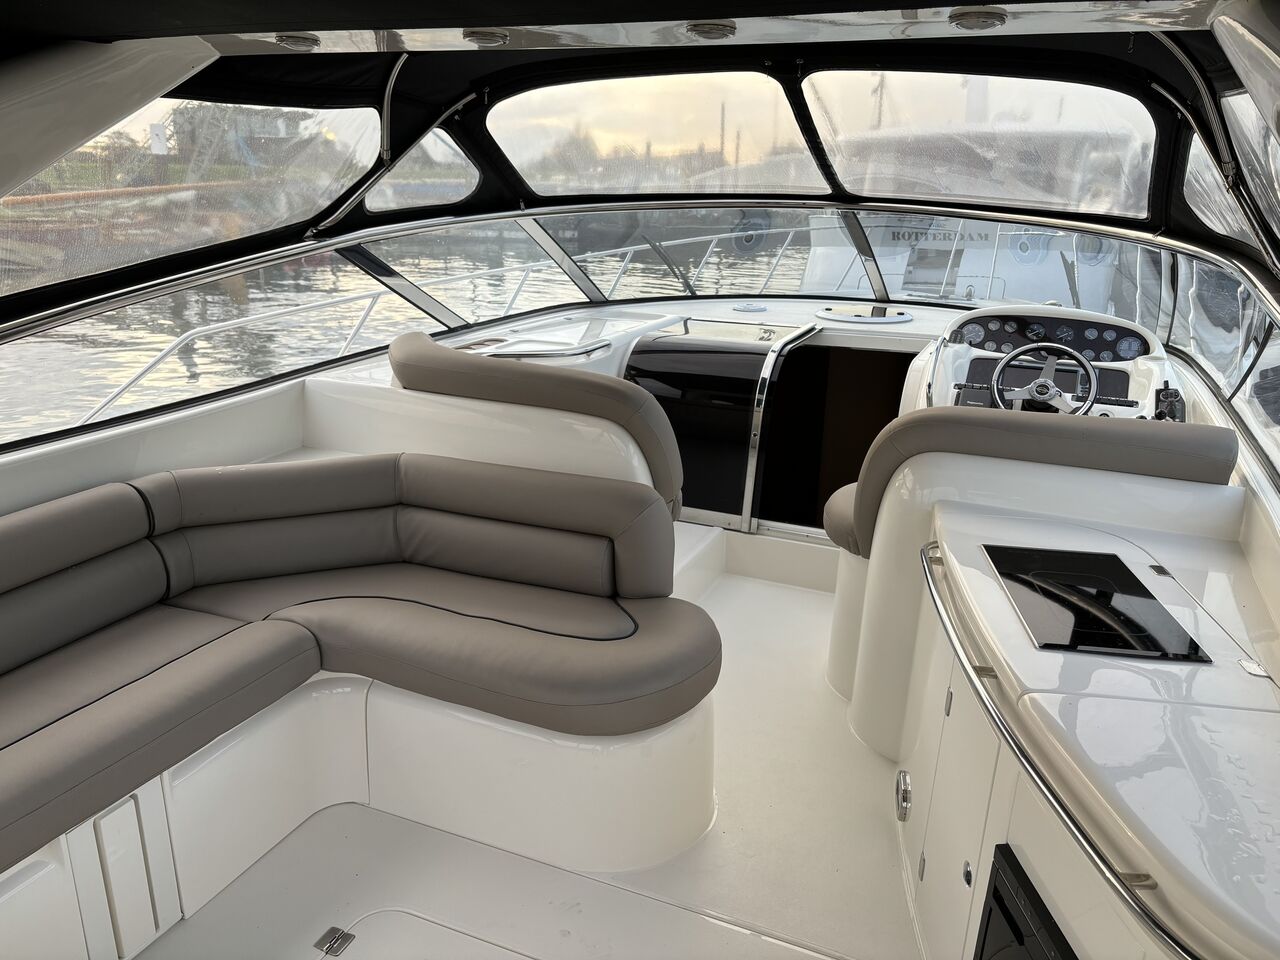 Sunseeker Camargue 47 - picture 3